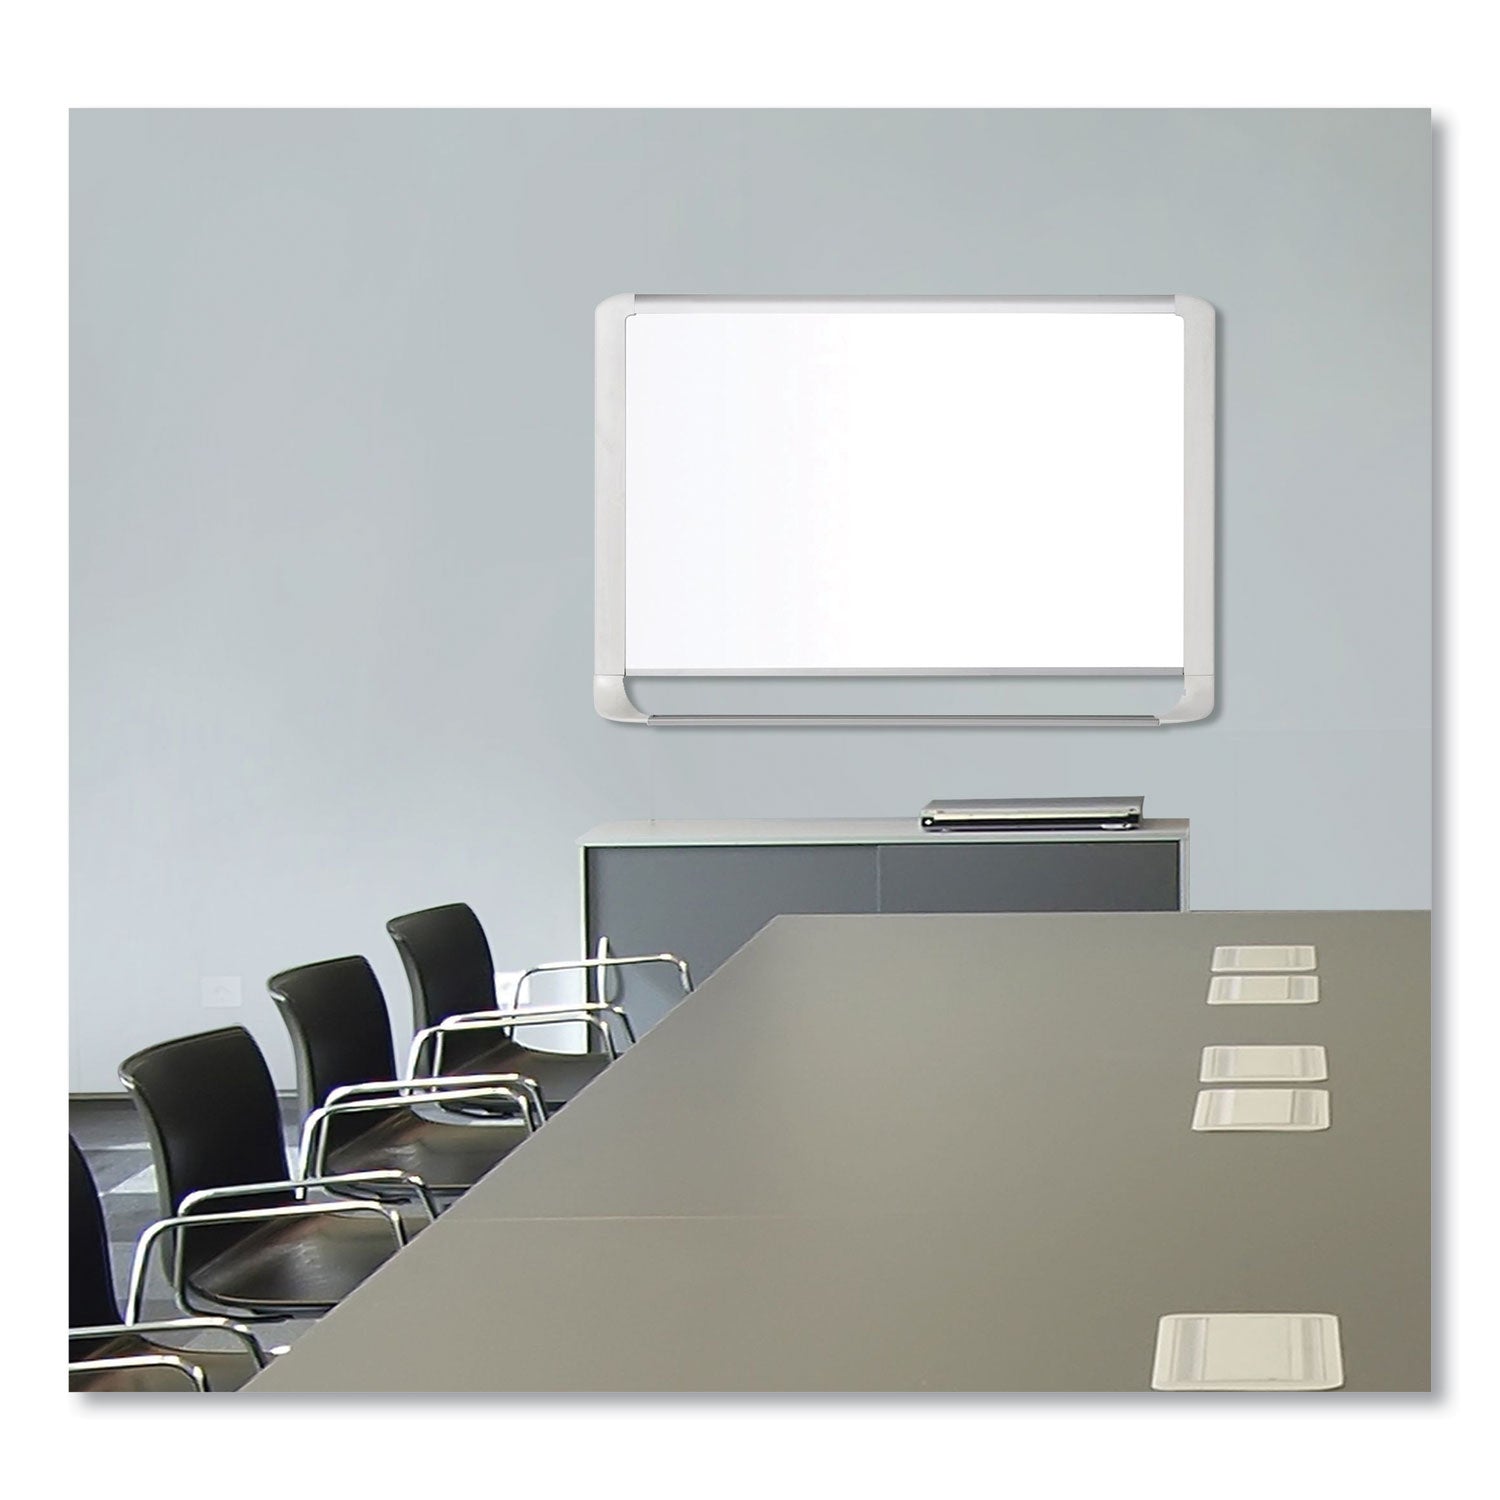 Gold Ultra Magnetic Dry Erase Boards, 48 x 36, White Surface, White Aluminum Frame - 